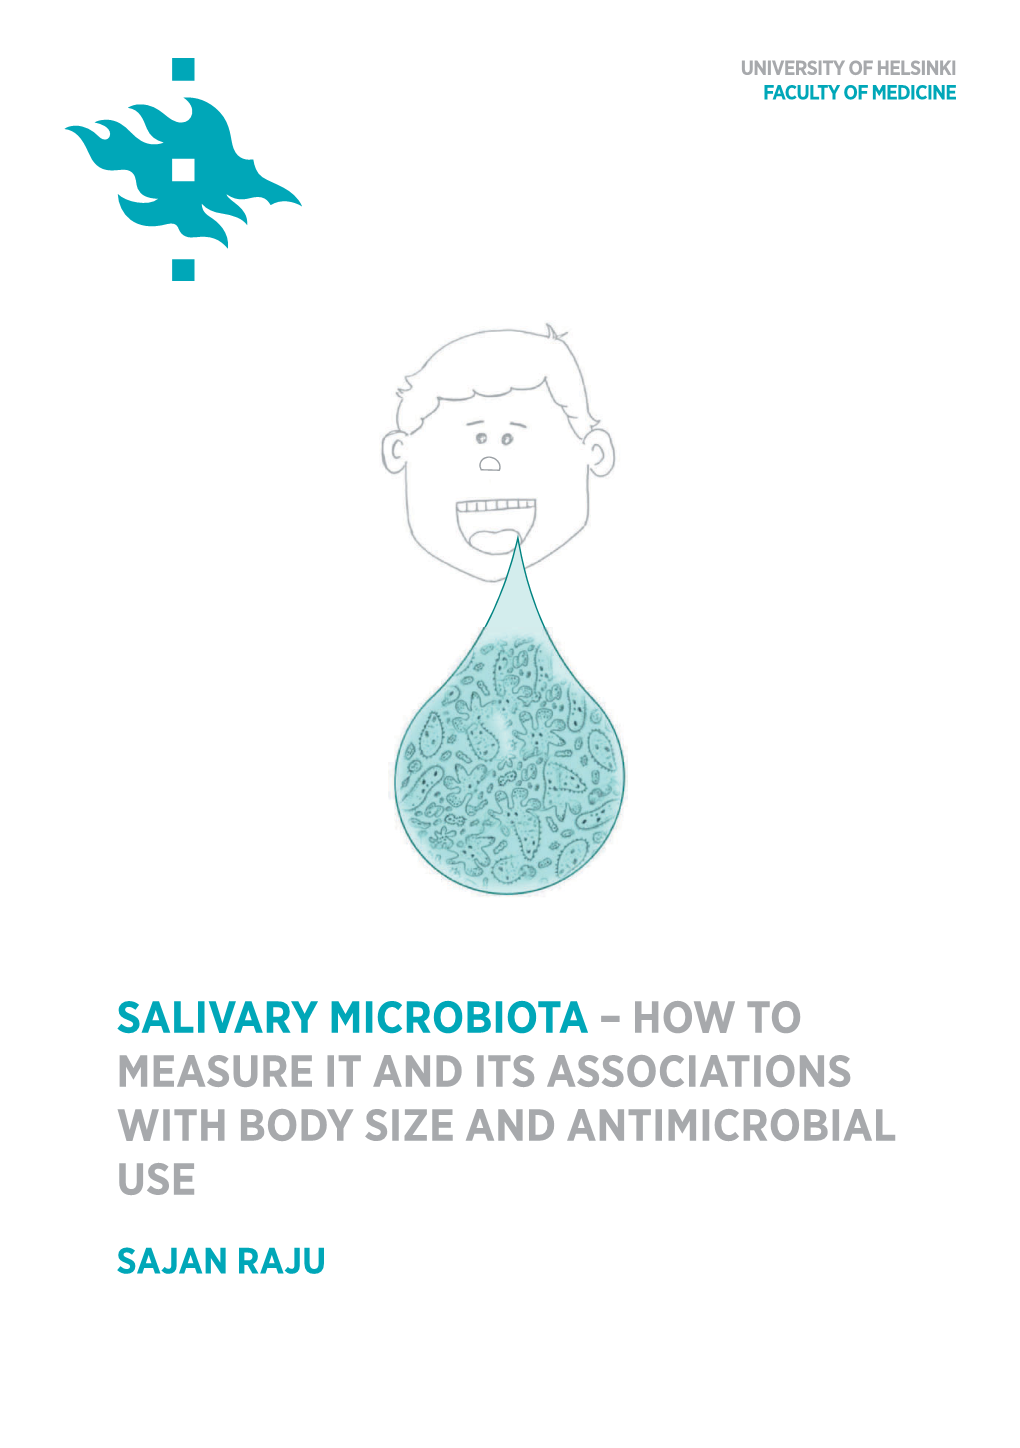 Salivary Microbiota – How to Measure It and Its Associations with Body Size and Antimicrobial Use